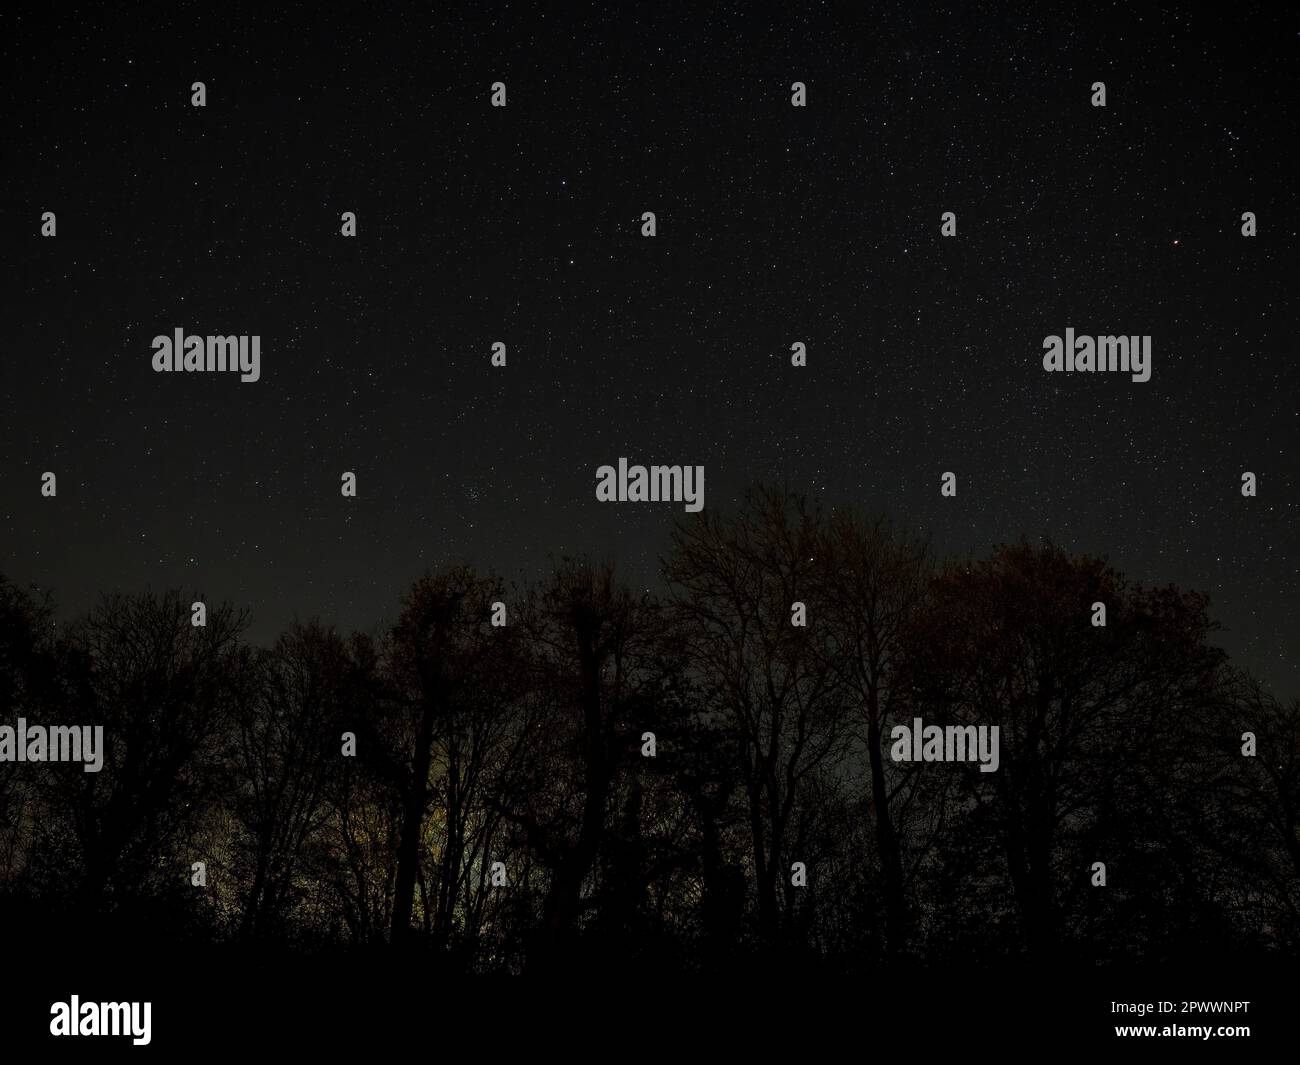 Night sky in Winter with constellations Gemini, Cancer, Lynx and light pollution behind silhouetted trees. Stock Photo